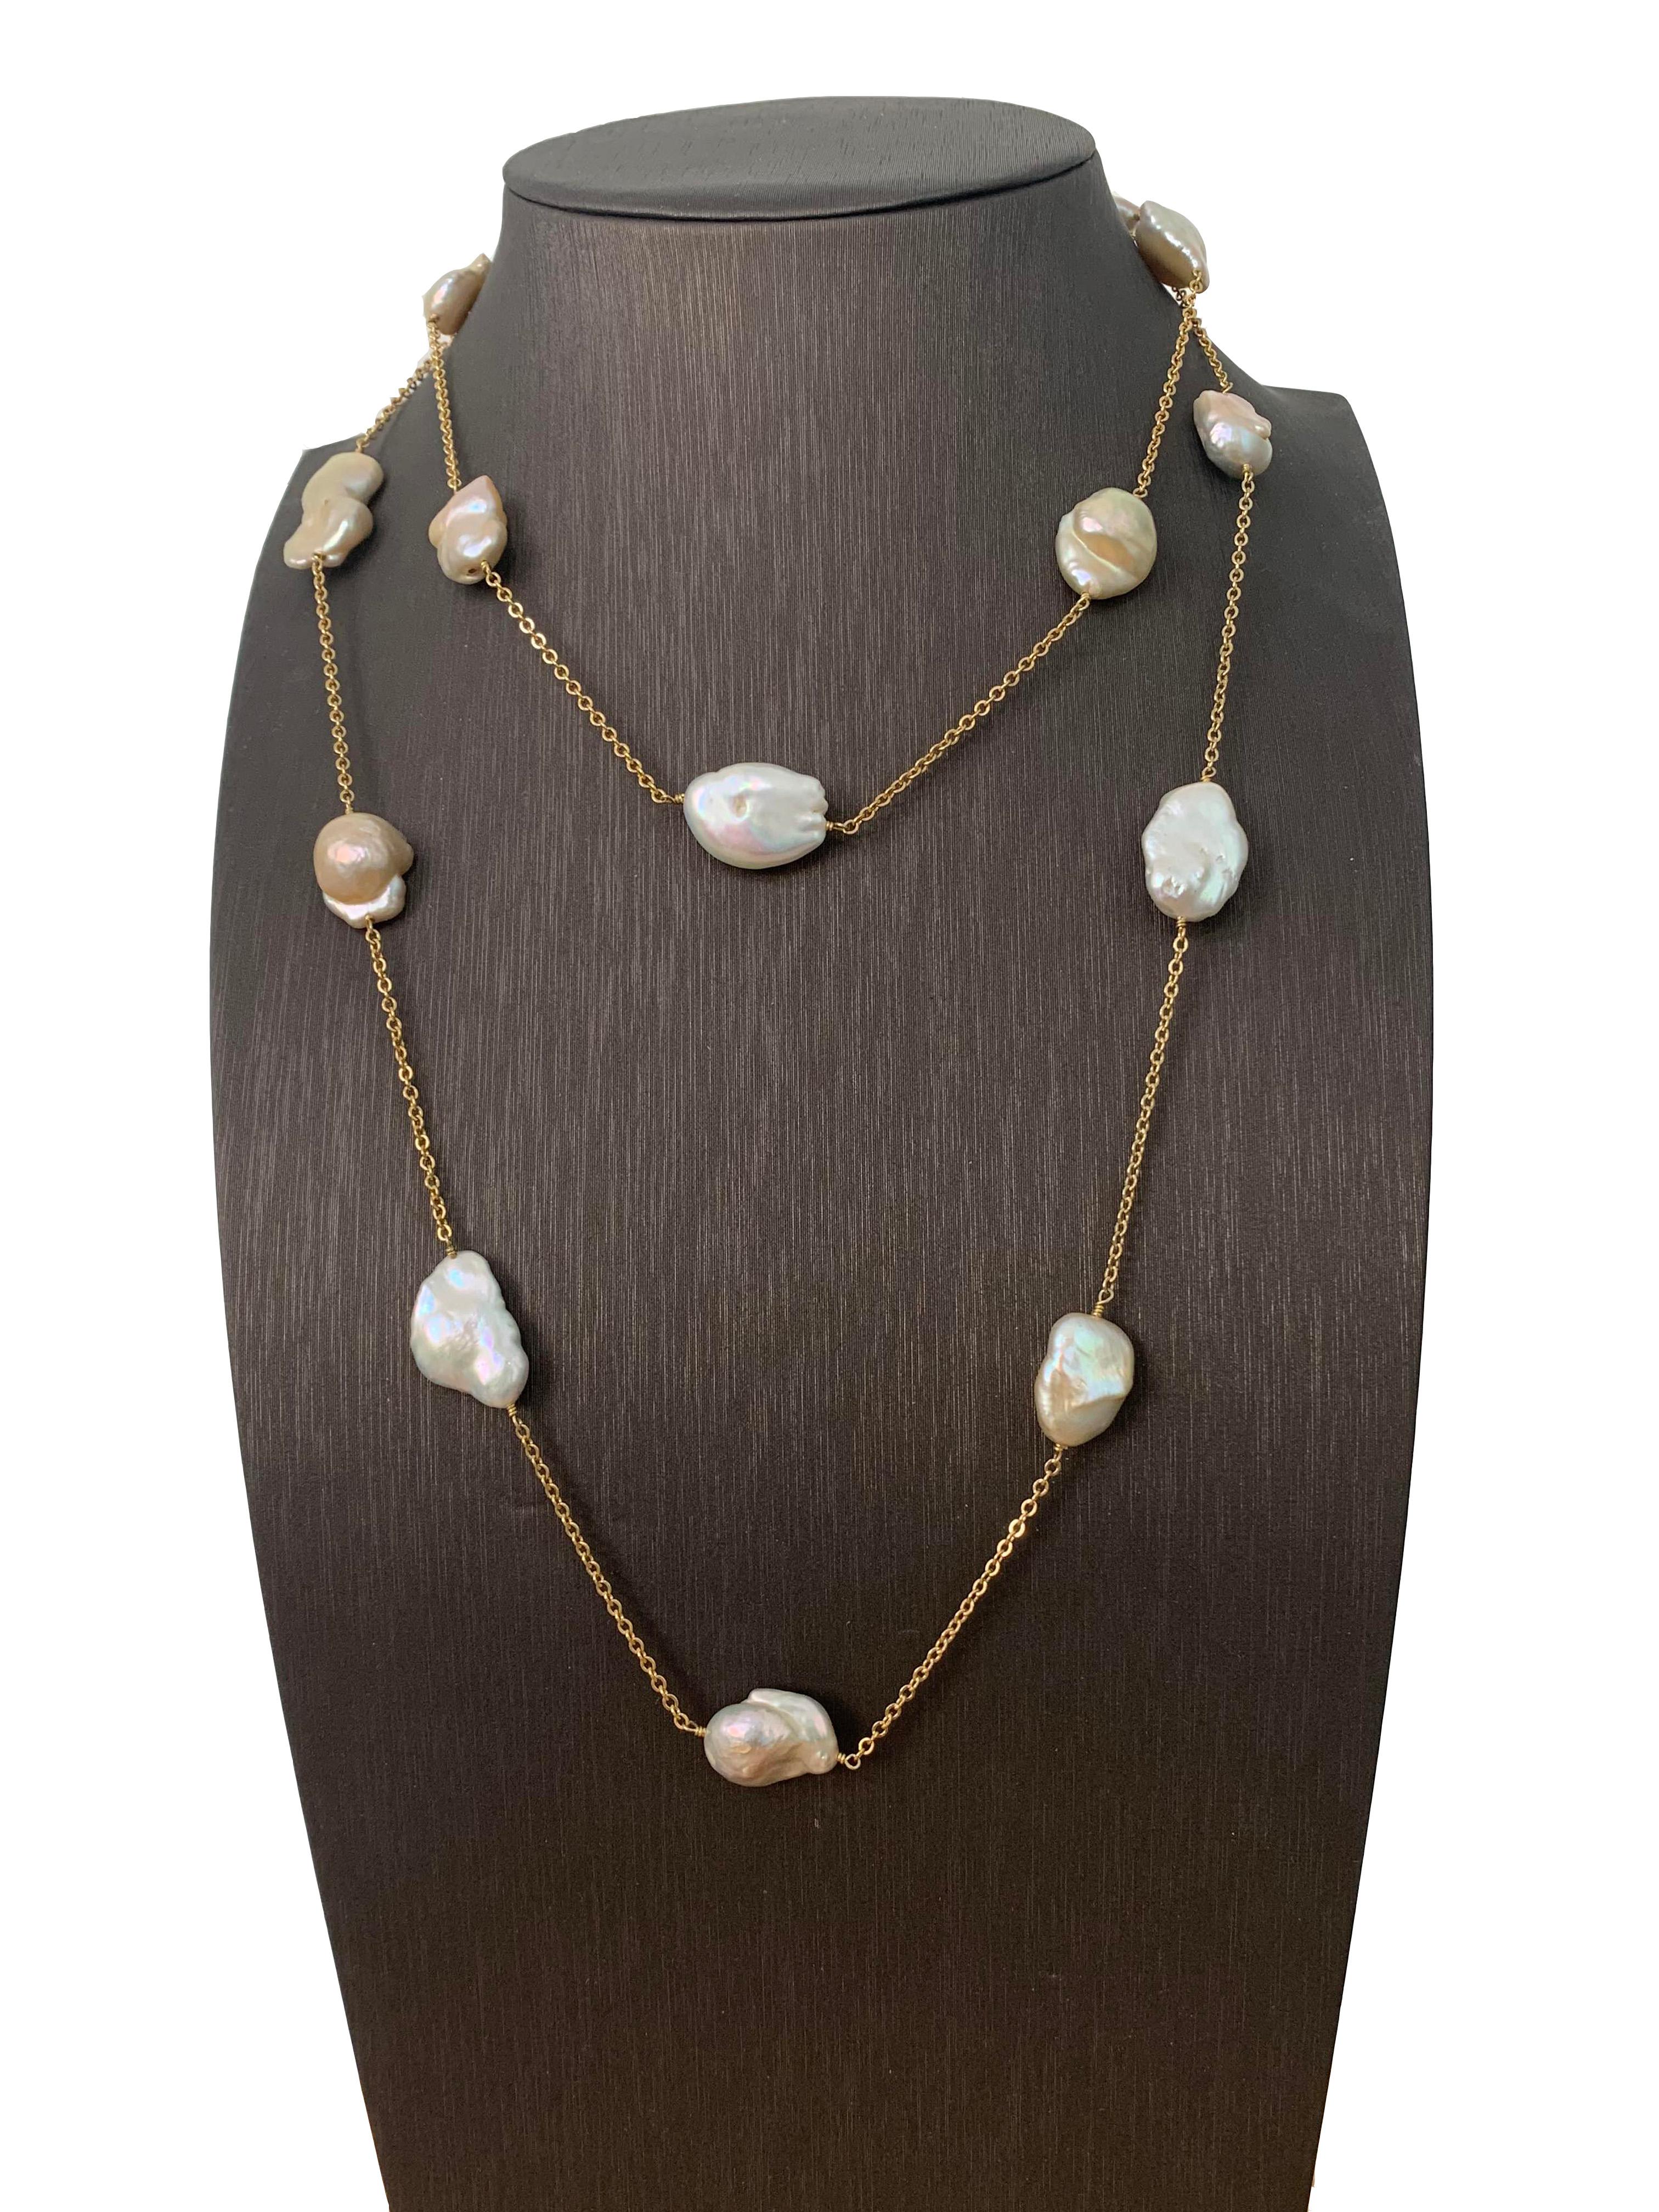 15pc of lustrous white & peach Japanese Keishi Pearl appx 12-17mm on 18k yellow gold plated sterling silver chain 48 Inch Station Necklace. 

Each pearl is unique and has high luster creating beautiful shiny iridescent.  Can be worn long, double, or